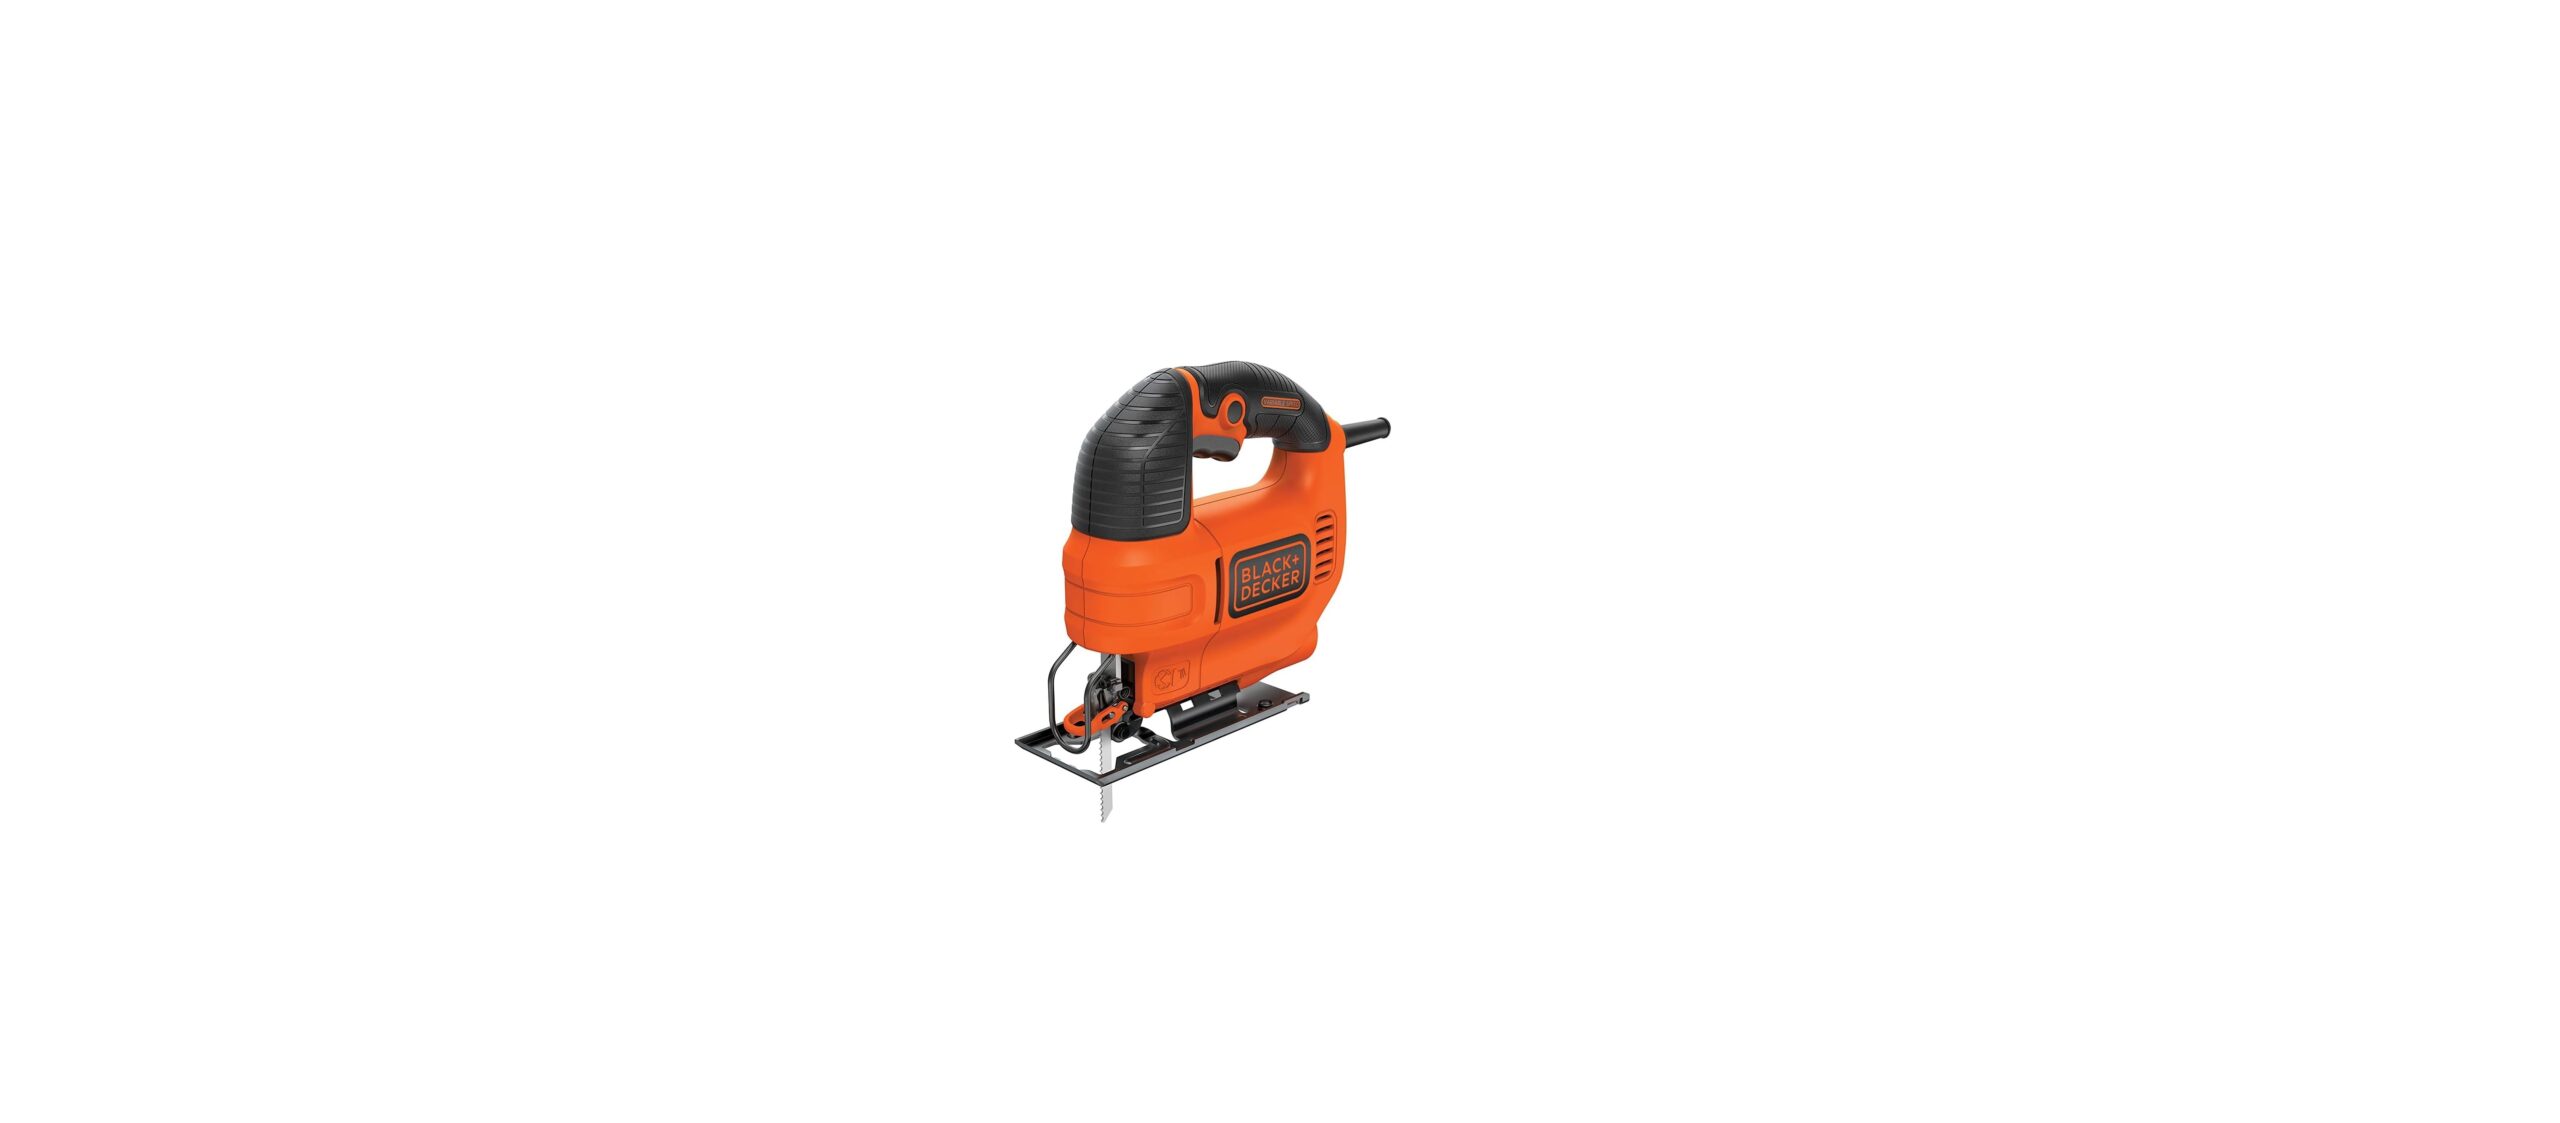 Chadwell Supply. BLACK & DECKER VARIABLE SPEED JIG SAW - JS515